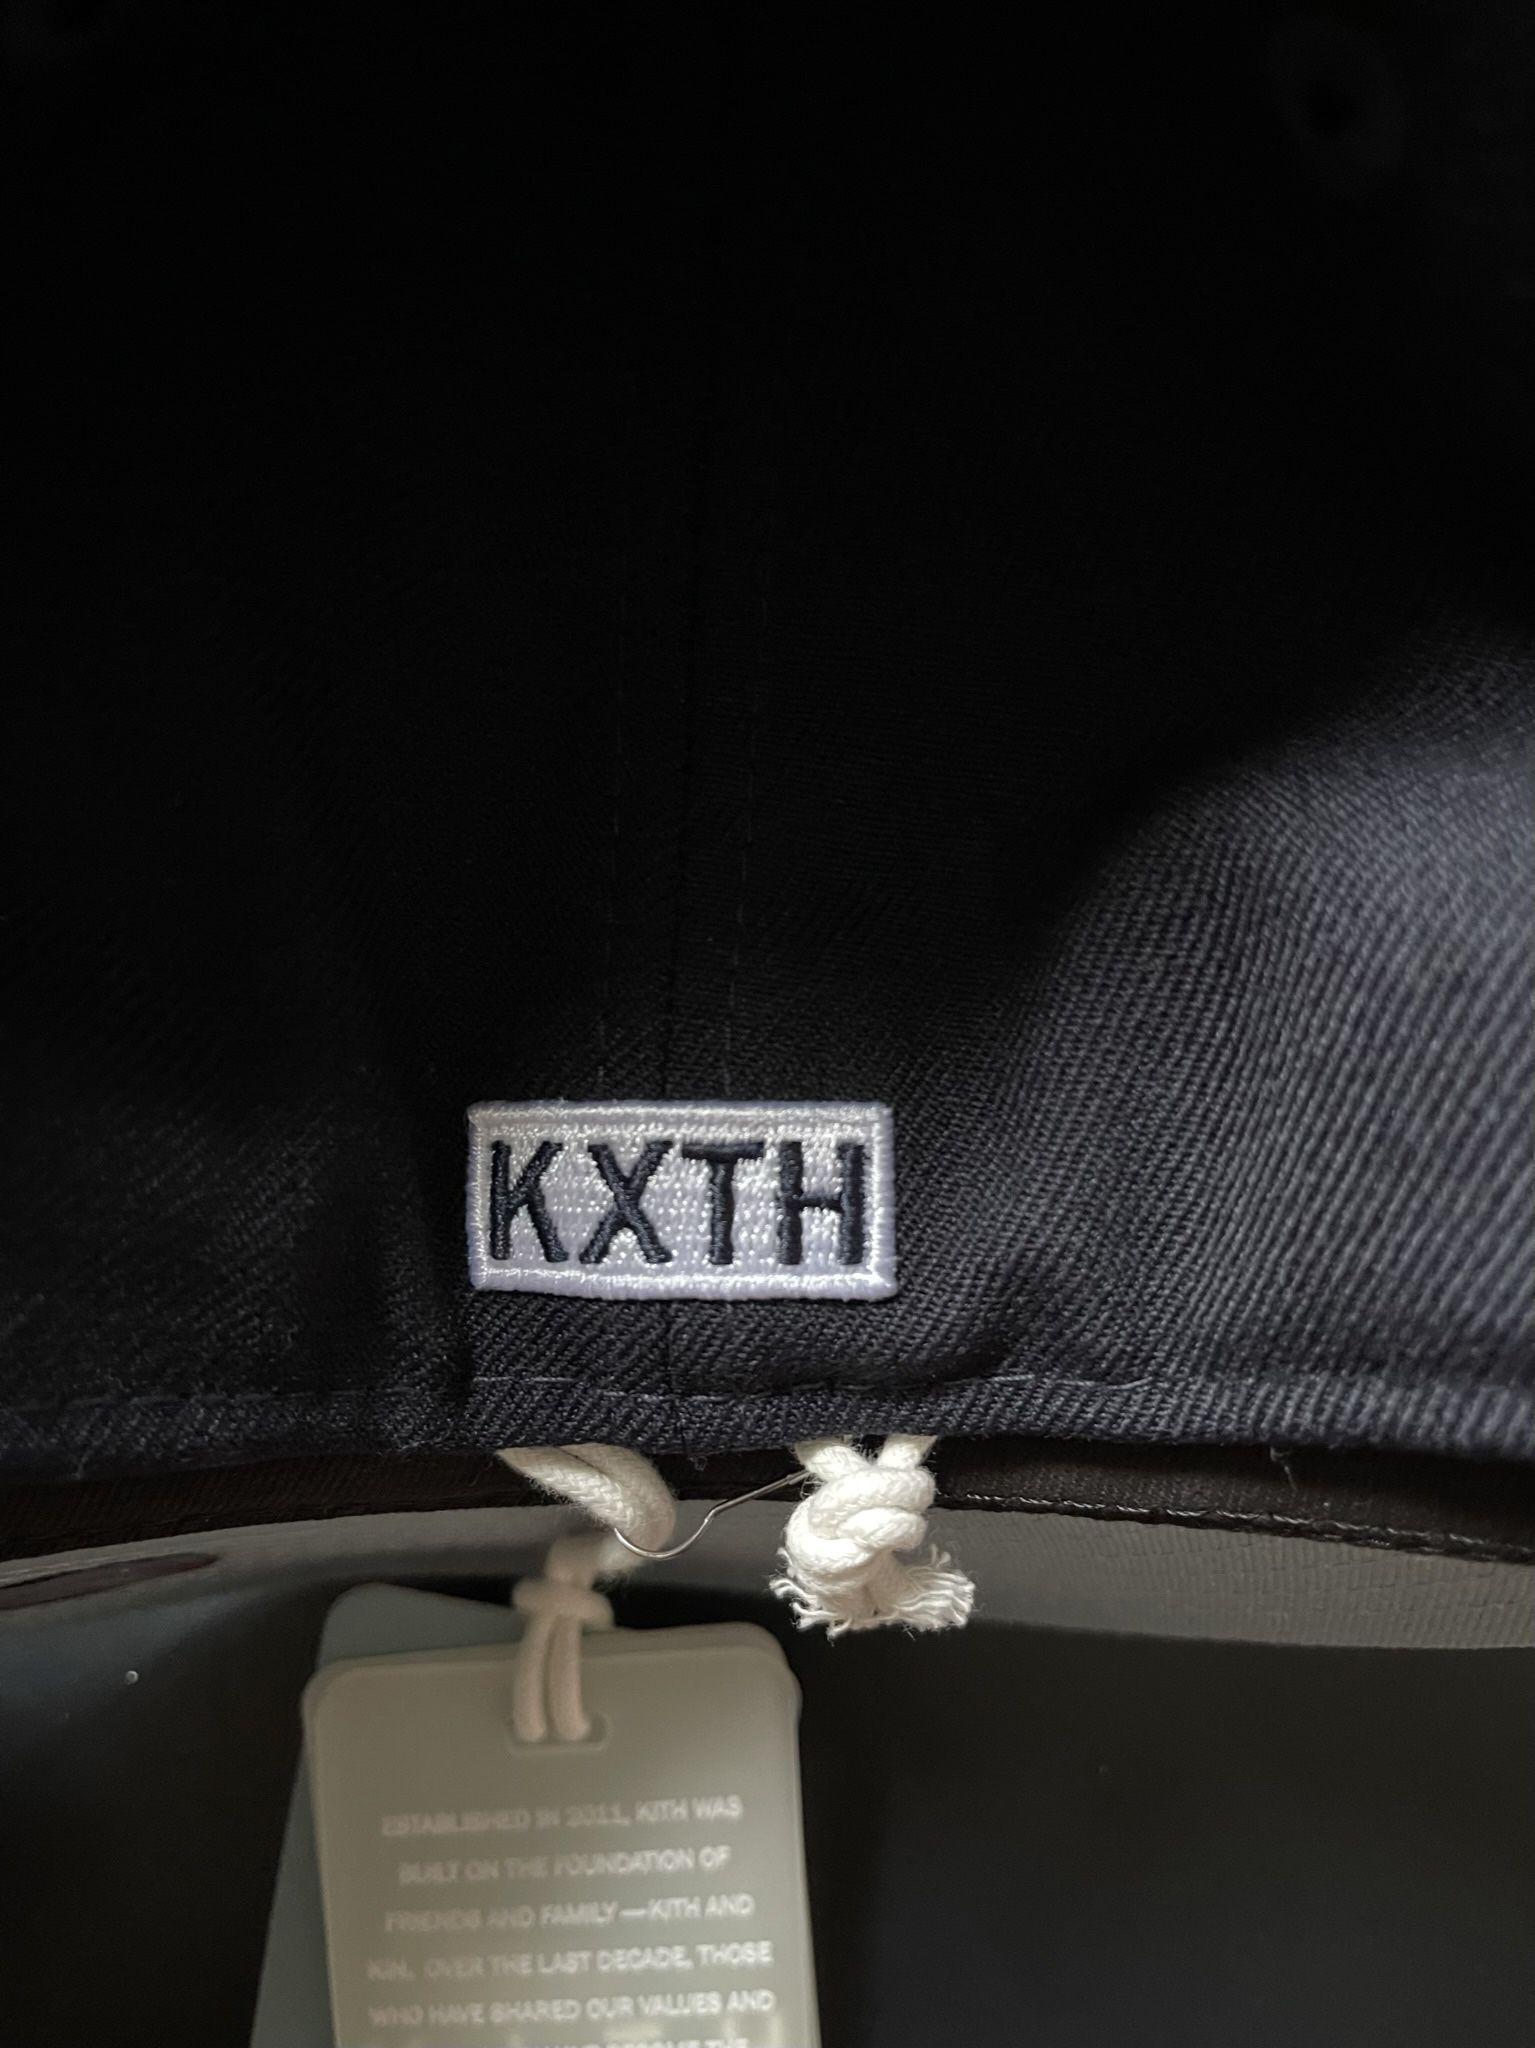 KITH FOR NEW ERA & YANKEES 10 YEAR ANNIVERSARY 1961 WORLD SERIES LOW PROFILE CAP - MAJESTIC-Sz 7 1/2